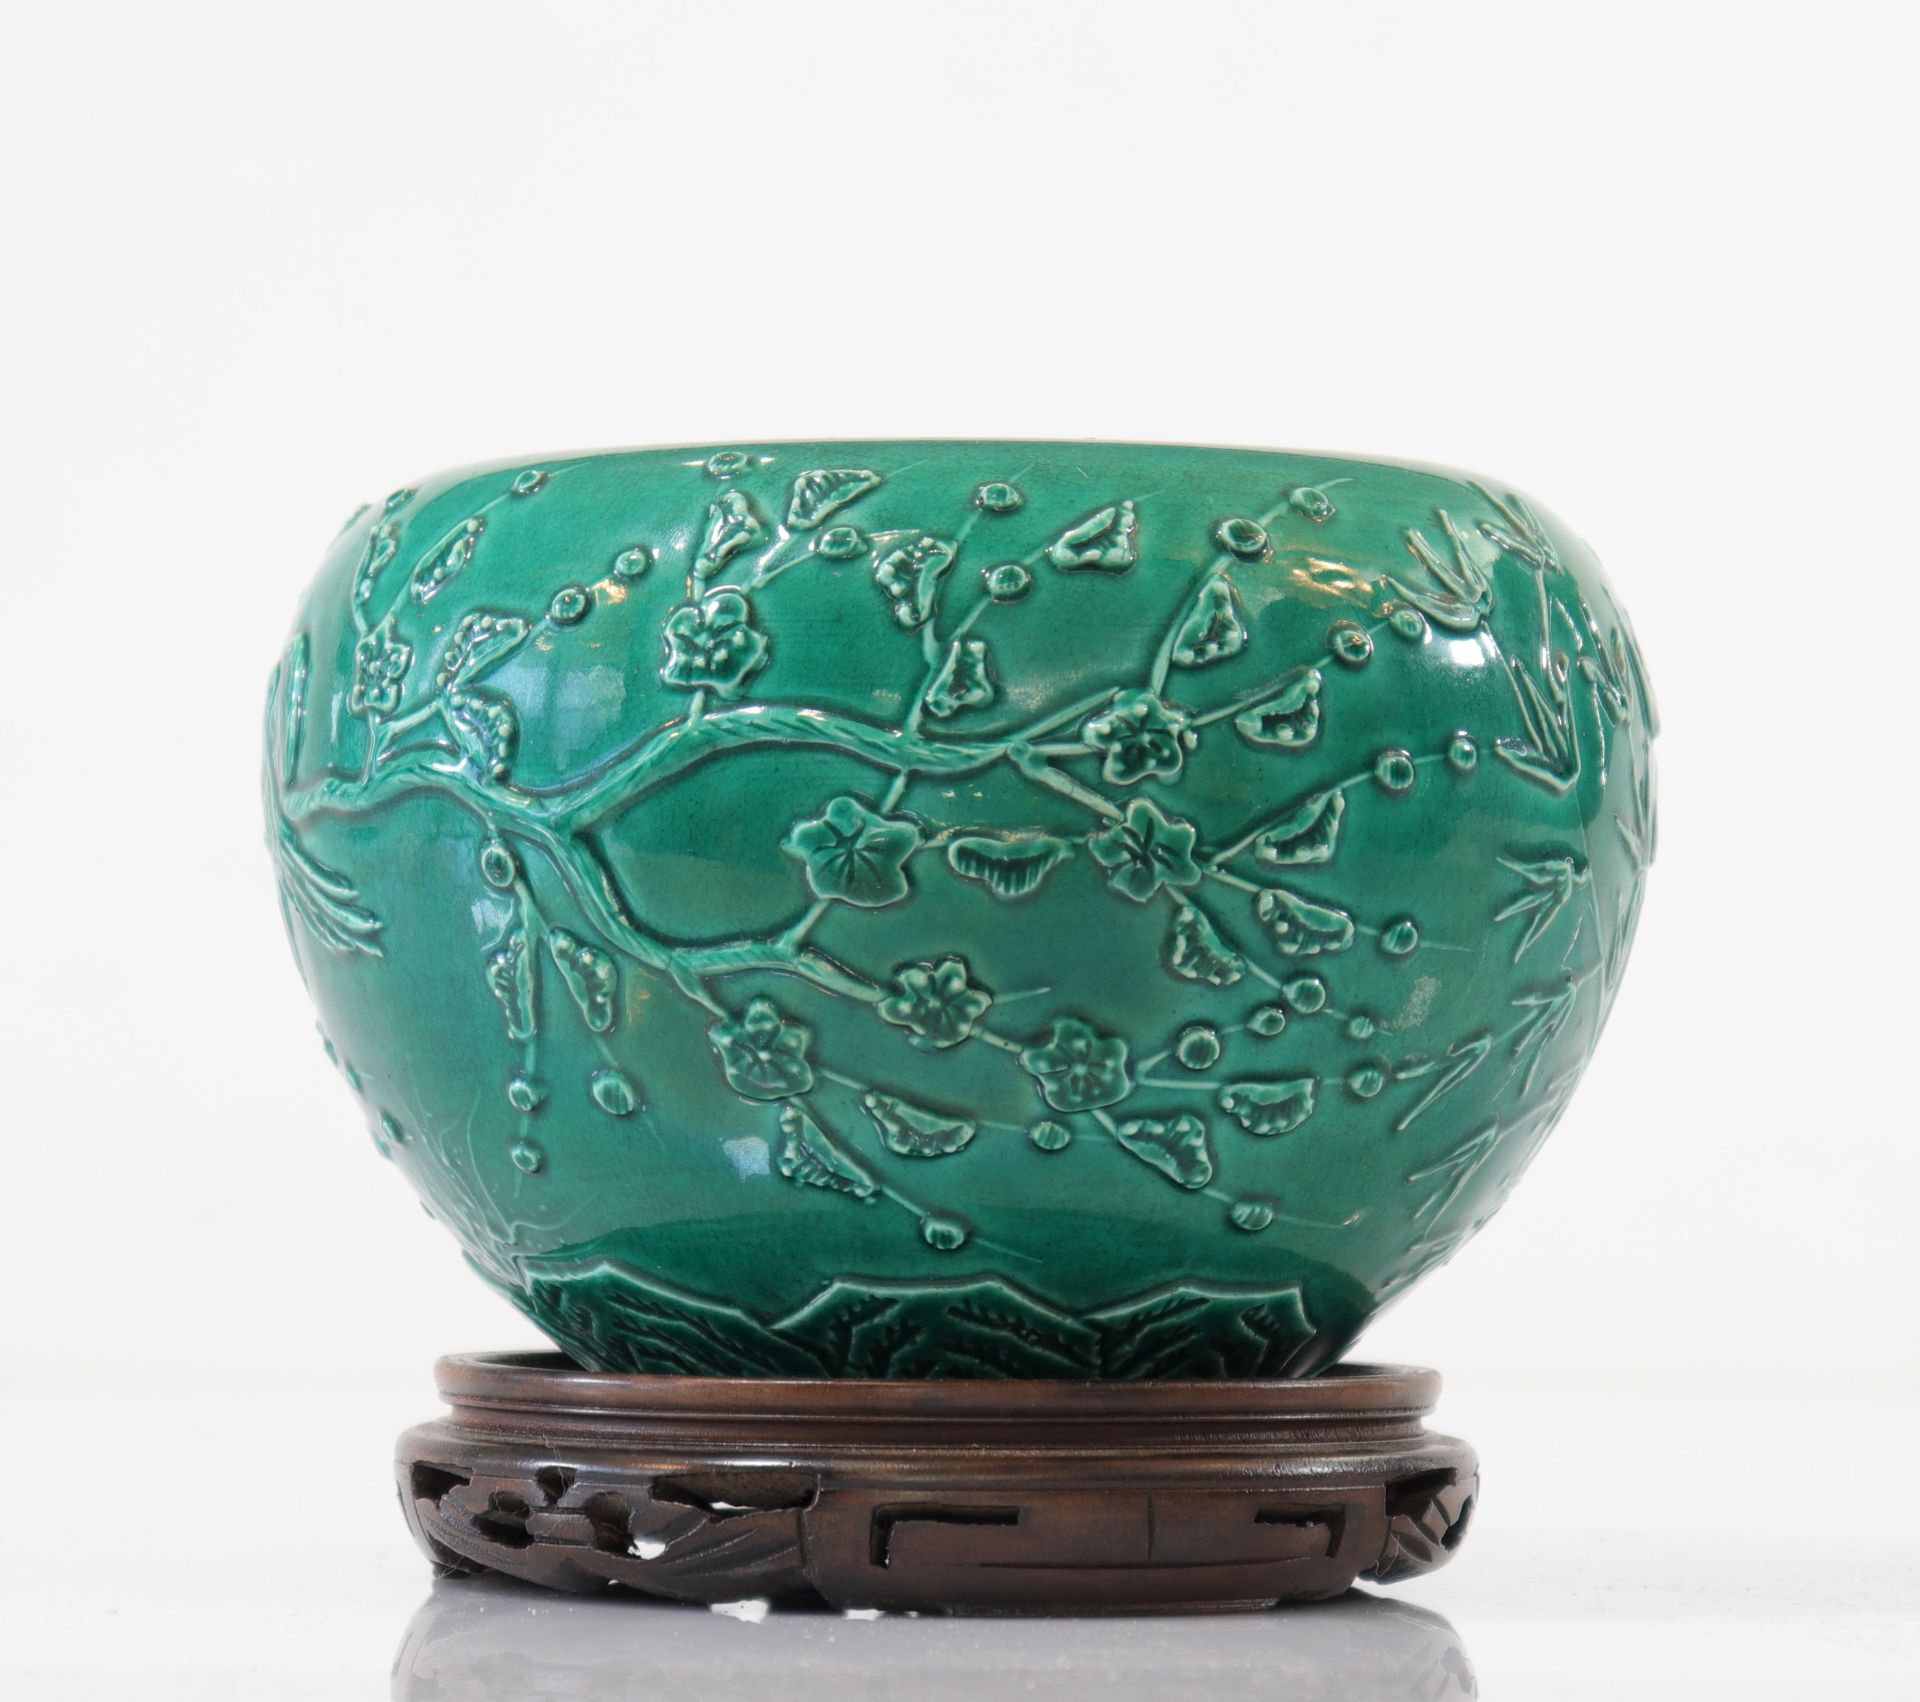 Chinese green porcelain vase with floral decoration marked under the piece